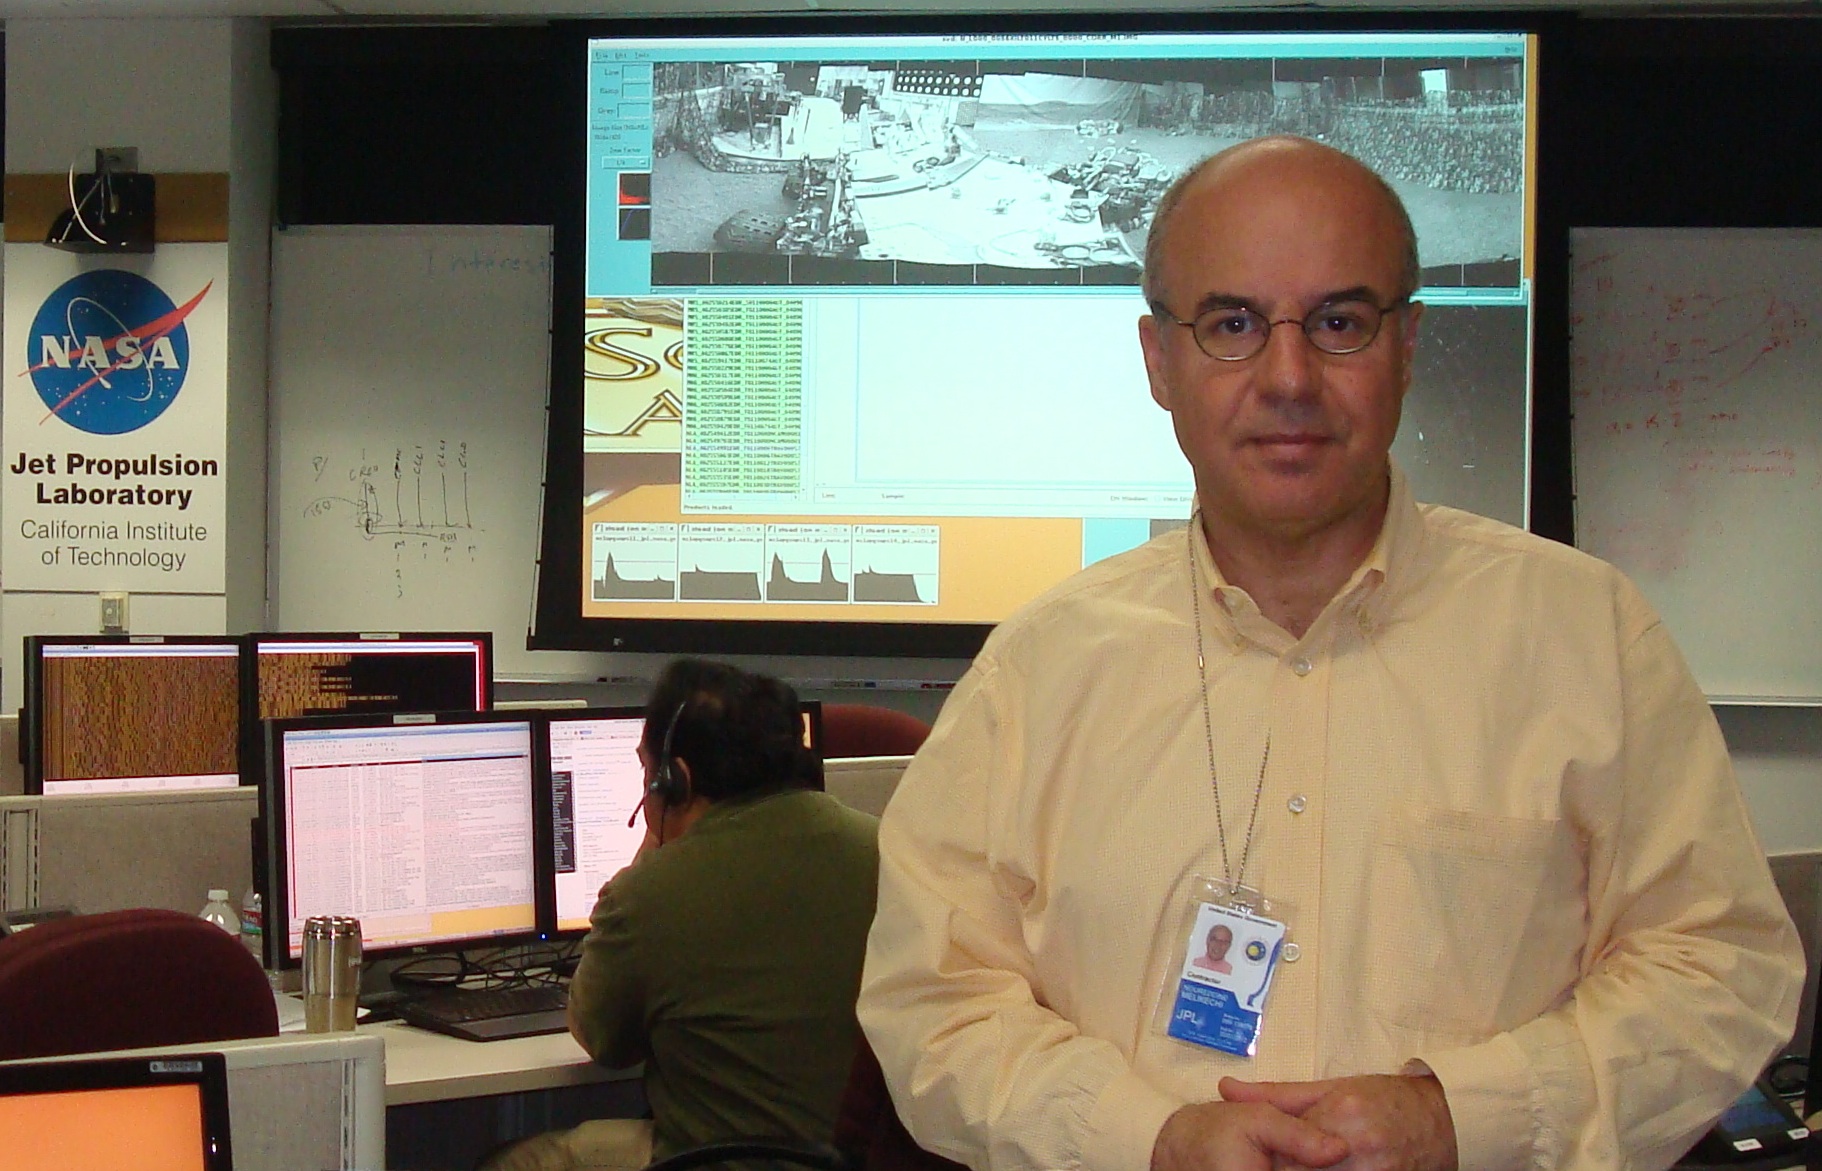  - Nm-at-JPL-Central-Command-Room-DSC03482